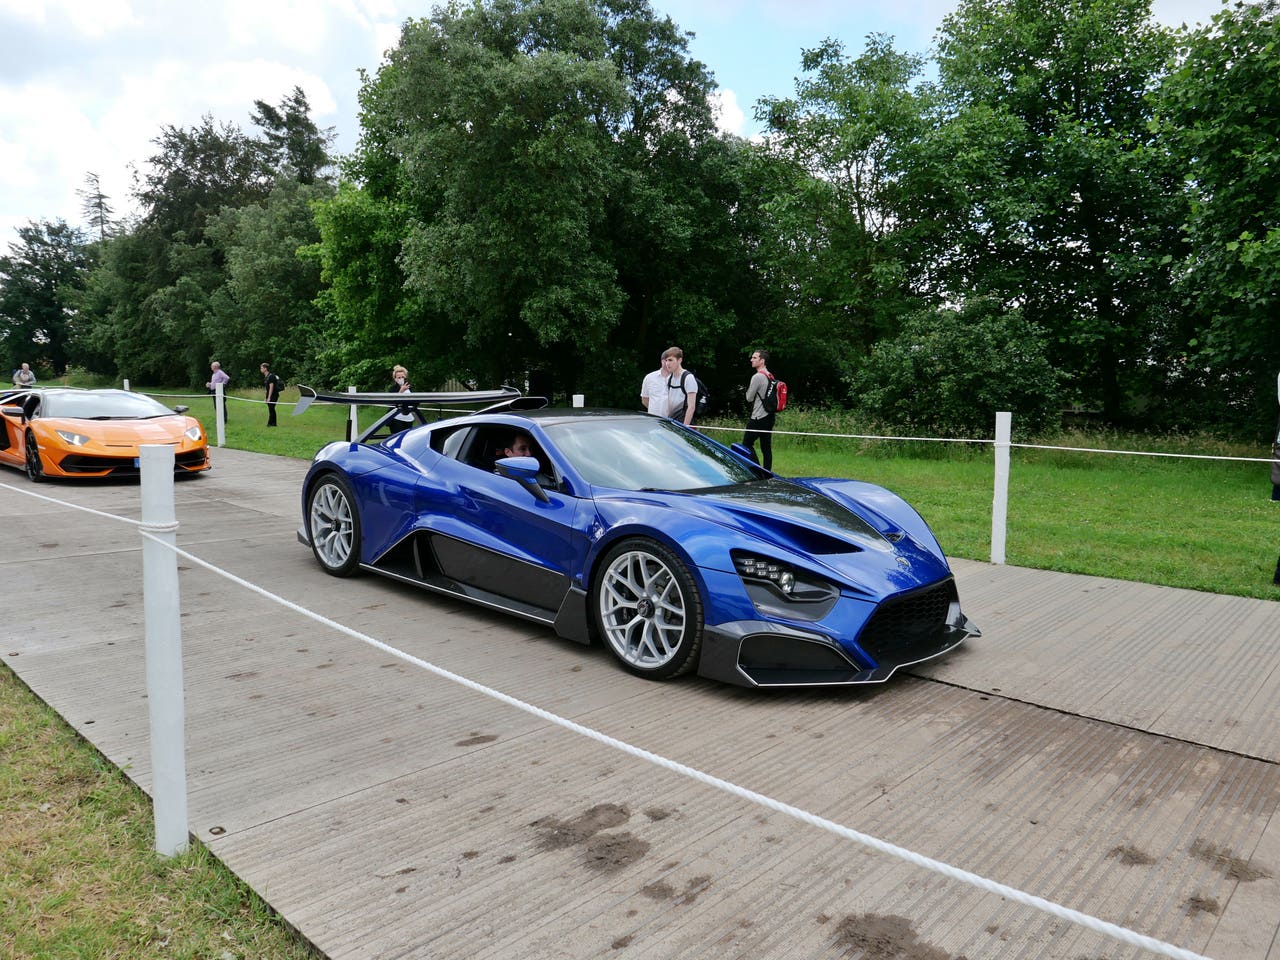 Attacking The Goodwood Hill Climb In The 1177bhp Zenvo Tsr S Express